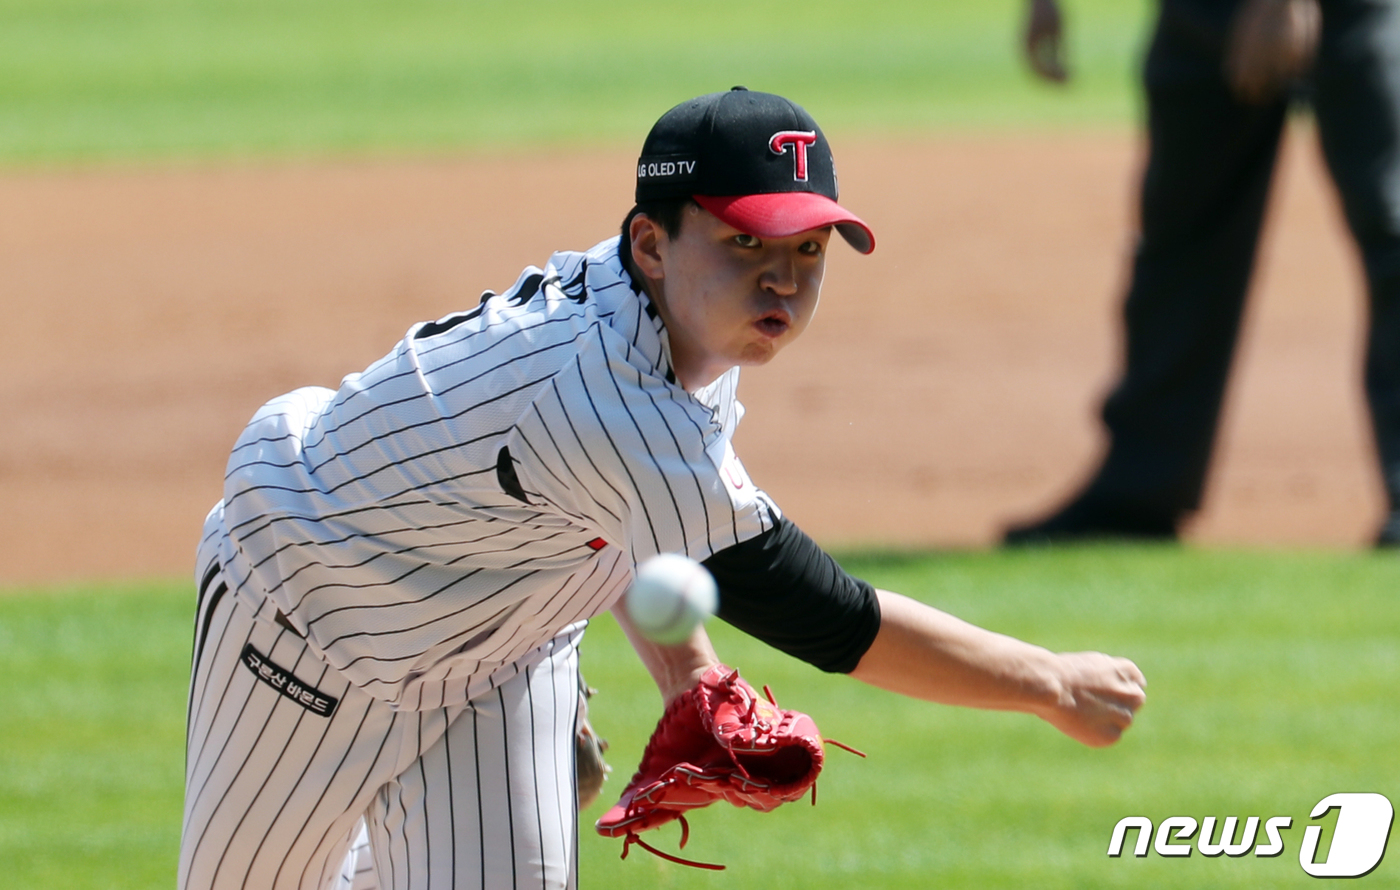 Lee Min-ho, who graduated from Hwimungo and joined LG this year, has already won two games since being given the starting job; Kyonggi has already played two innings in seven innings.Pro debut It has emerged as an indispensable resource in LG Mound since the first year of the pro.Lee Min-ho, who won his first debut victory in 513 innings and 1 Pit without a run in the Deagu Samsung Lions on May 21, continued his pitching run with two runs in seven innings during the Jamsil-dong Samsung Lions game on June 2, and the day before the Jamsil-dong SK game also won two wins in seven innings with one run in seven innings. ...On this day, he played 112 of his own Kyonggi.There are still few specimens, but the stability that is not inferior to Veteran players is an advantage.He allowed four walks in his first start, but he did not give up a single walk in his second and third appearances.I hope the walks (of Lee Min-ho) will be reduced, Ryu said earlier, but he met expectations for the head coach.The face is full of young tees, but on Mound it is full of guts and slack.It is a scene that is hard to find in Lee Min-ho, which is a boldness that can not be believed to be the first year of a rookie.In the case of SK and Doubleheader on the 11th, Lee Min-ho was selected without change in the relatively important first leg.Ryu emphasized that he decided according to his own standards, but he had that much trust.Ryu also smiles at his mouth every day, and now he has gained confidence that he can actively use Lee Min-ho in LGs starting lineup.Currently, Ryu is using Lee Min-ho as a starter with Veteran Chung Chan-heon and reducing the burden.There is plenty of room to keep this framework in the future, but more aggressively and actively use Kyonggi.It shows not only the power of the moment but also the intention to lead the growth of the player.Meanwhile, Lee Min-ho, who is currently on the disabled list due to mild back pain, is expected to join the first-team selection rotation in line with his existing schedule after reorganizing.Already two wins in the season, plenty of starter confidence